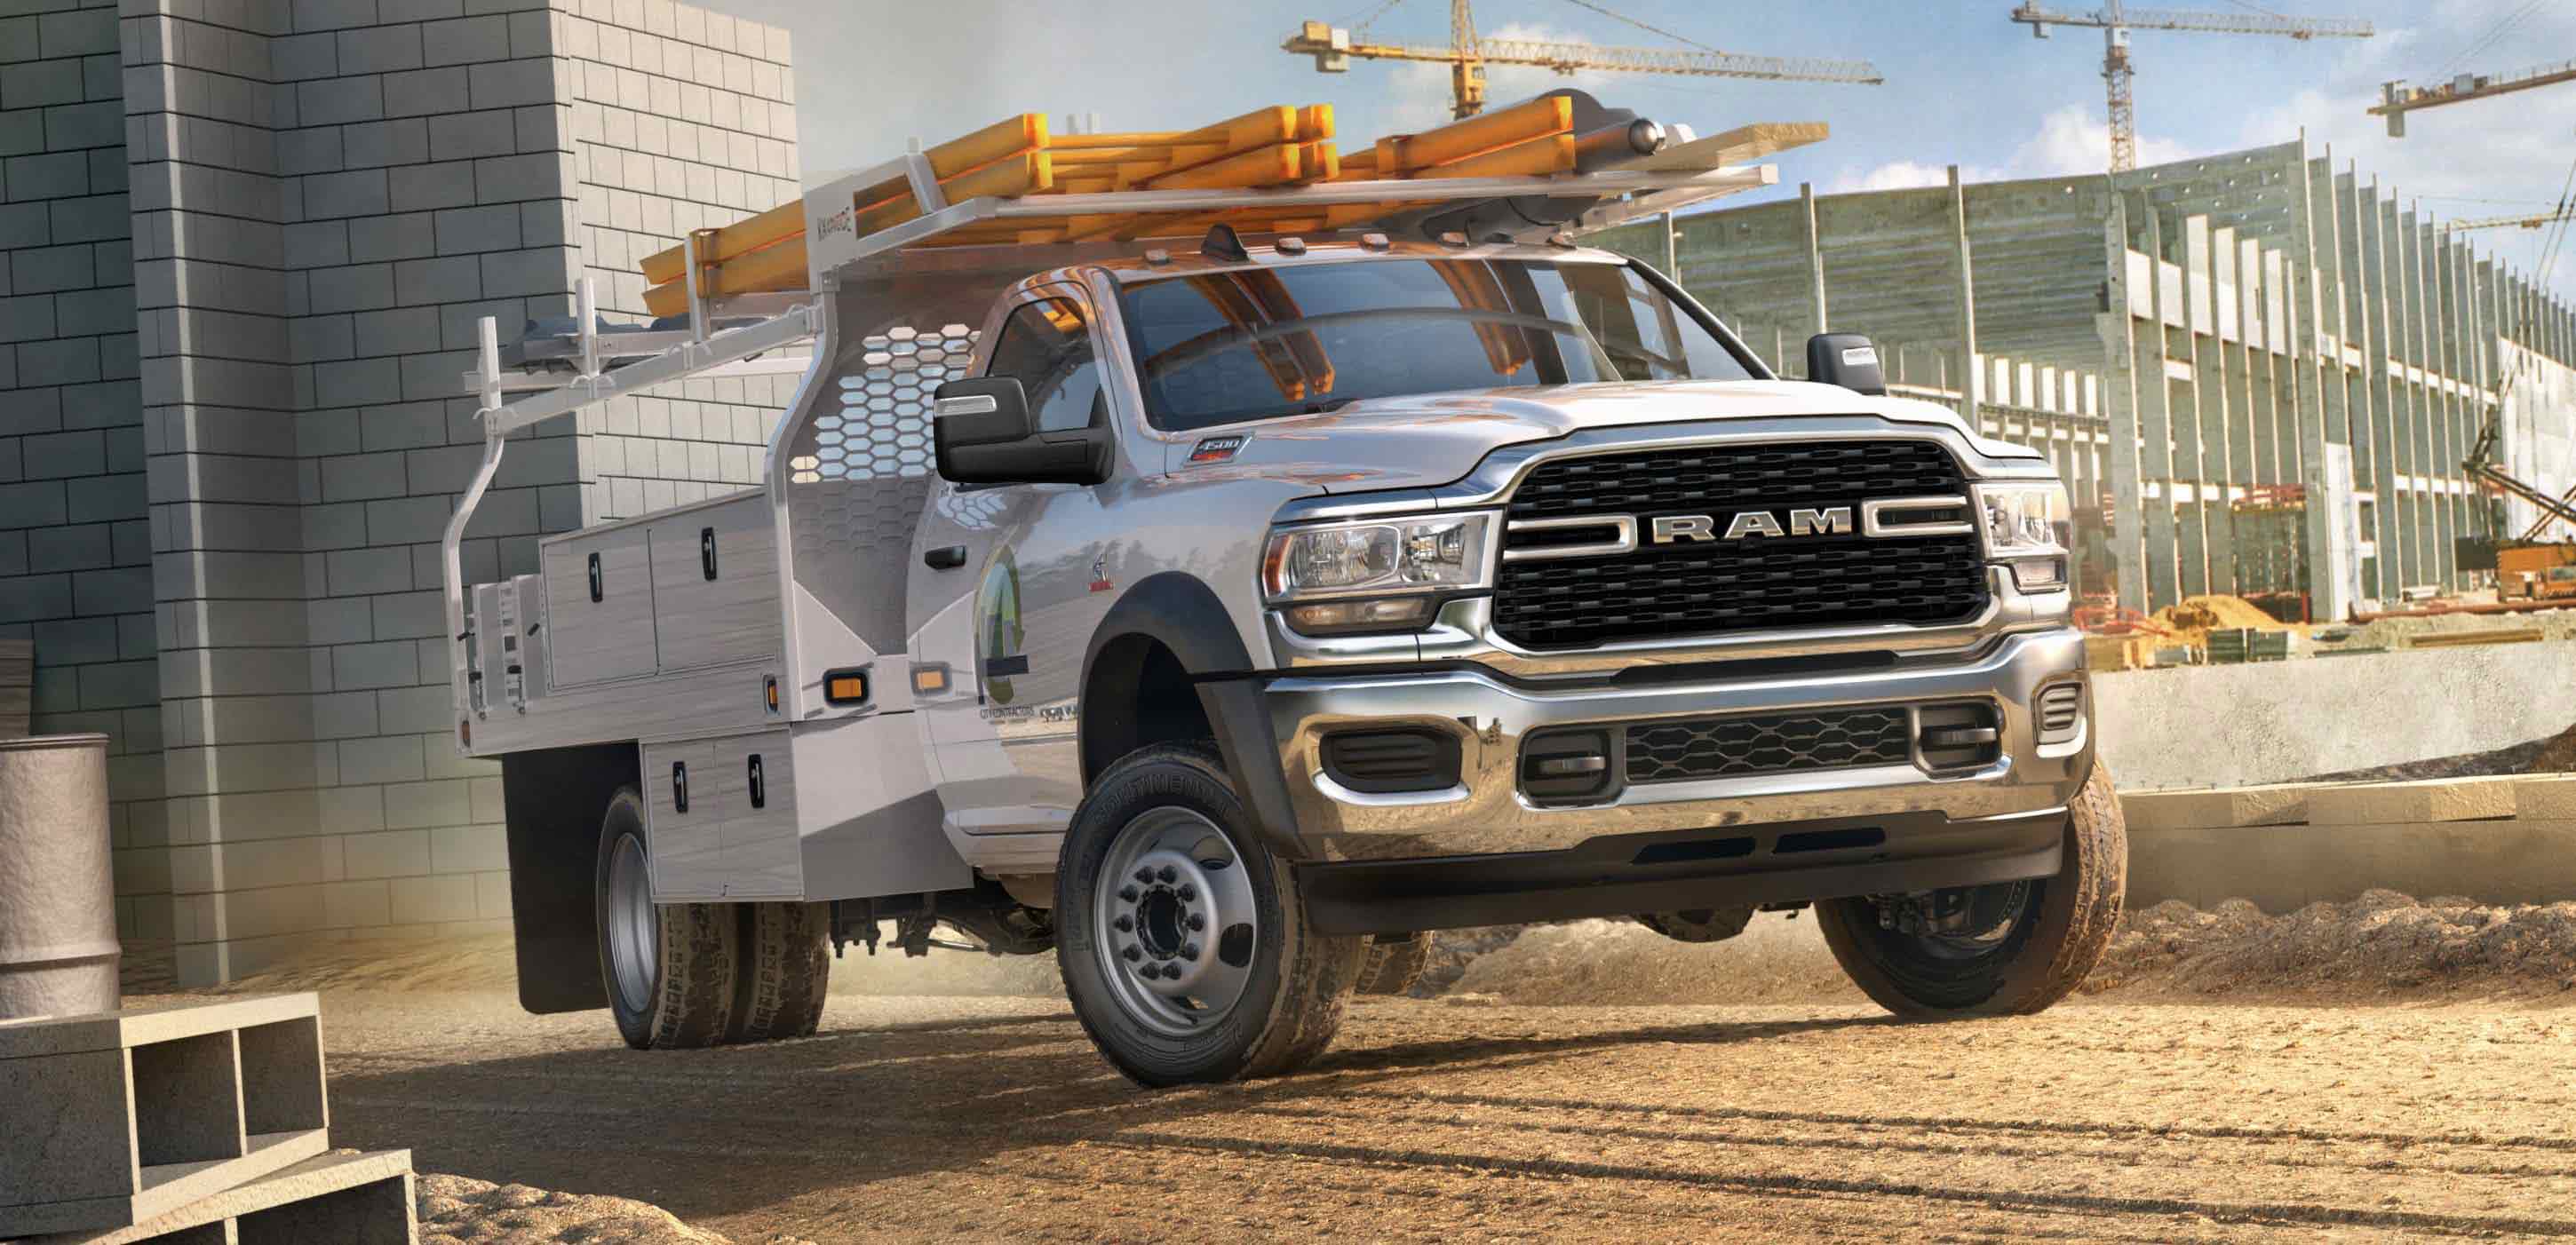 Display A white 2024 Ram 4500 SLT Chassis Cab Regular Cab with a utility upfit and ladder rack with two ladders attached, parked at a construction site.